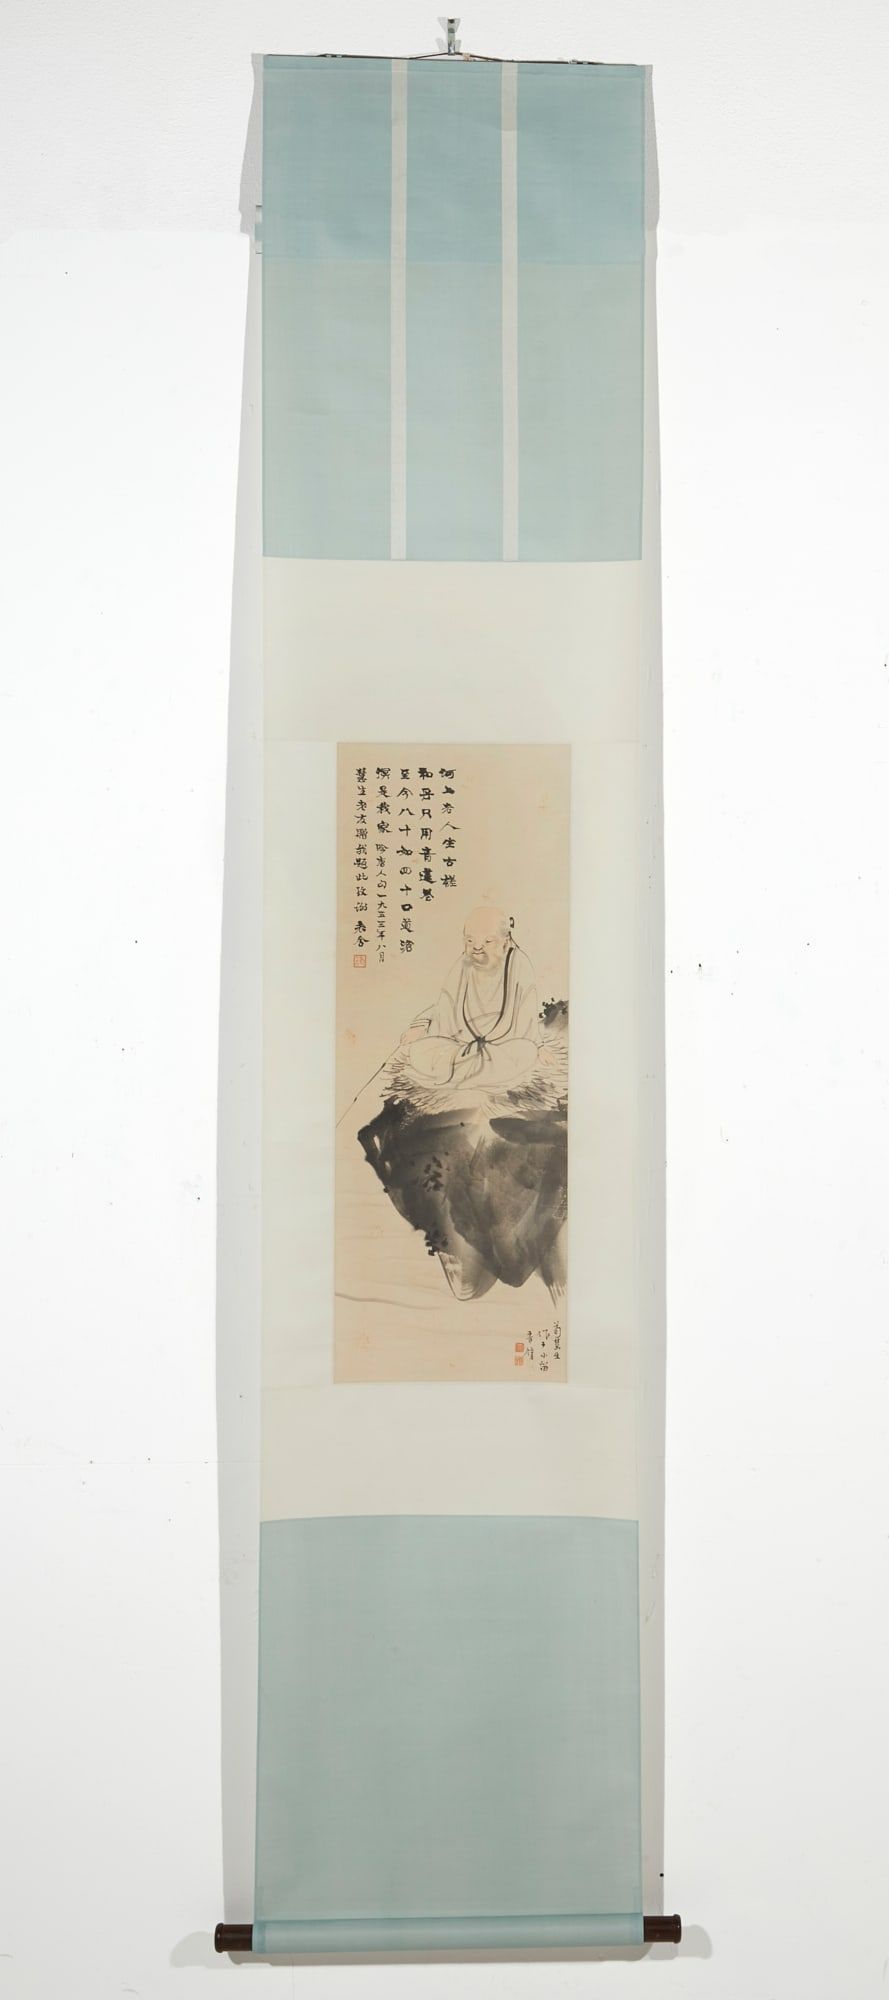 A CHINESE FIGURE PAINTING HANGING